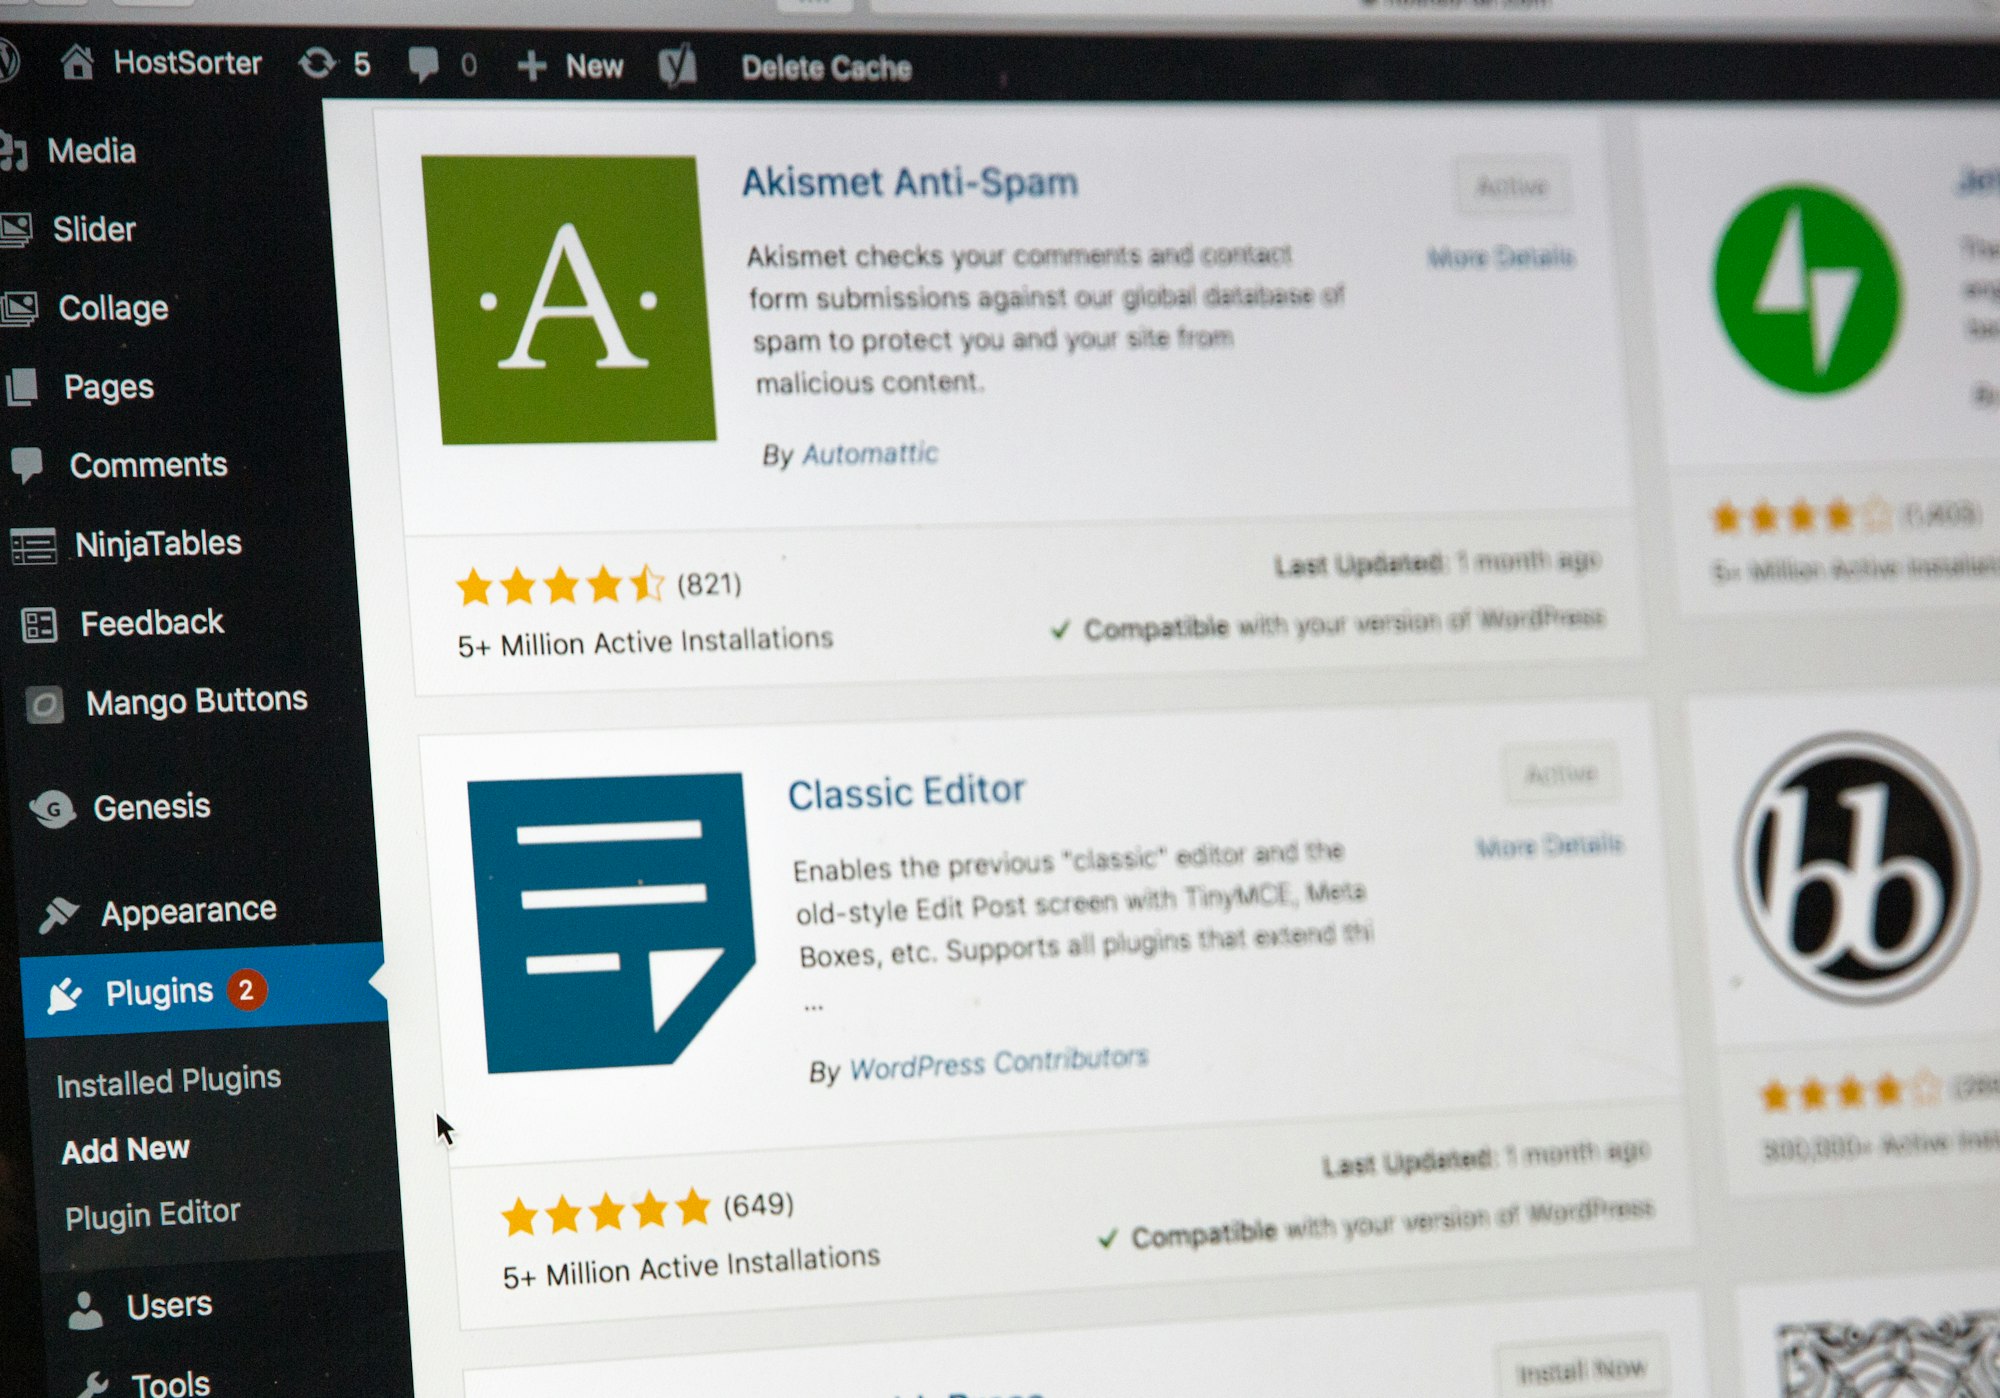 How to Secure WordPress: Advanced Guide